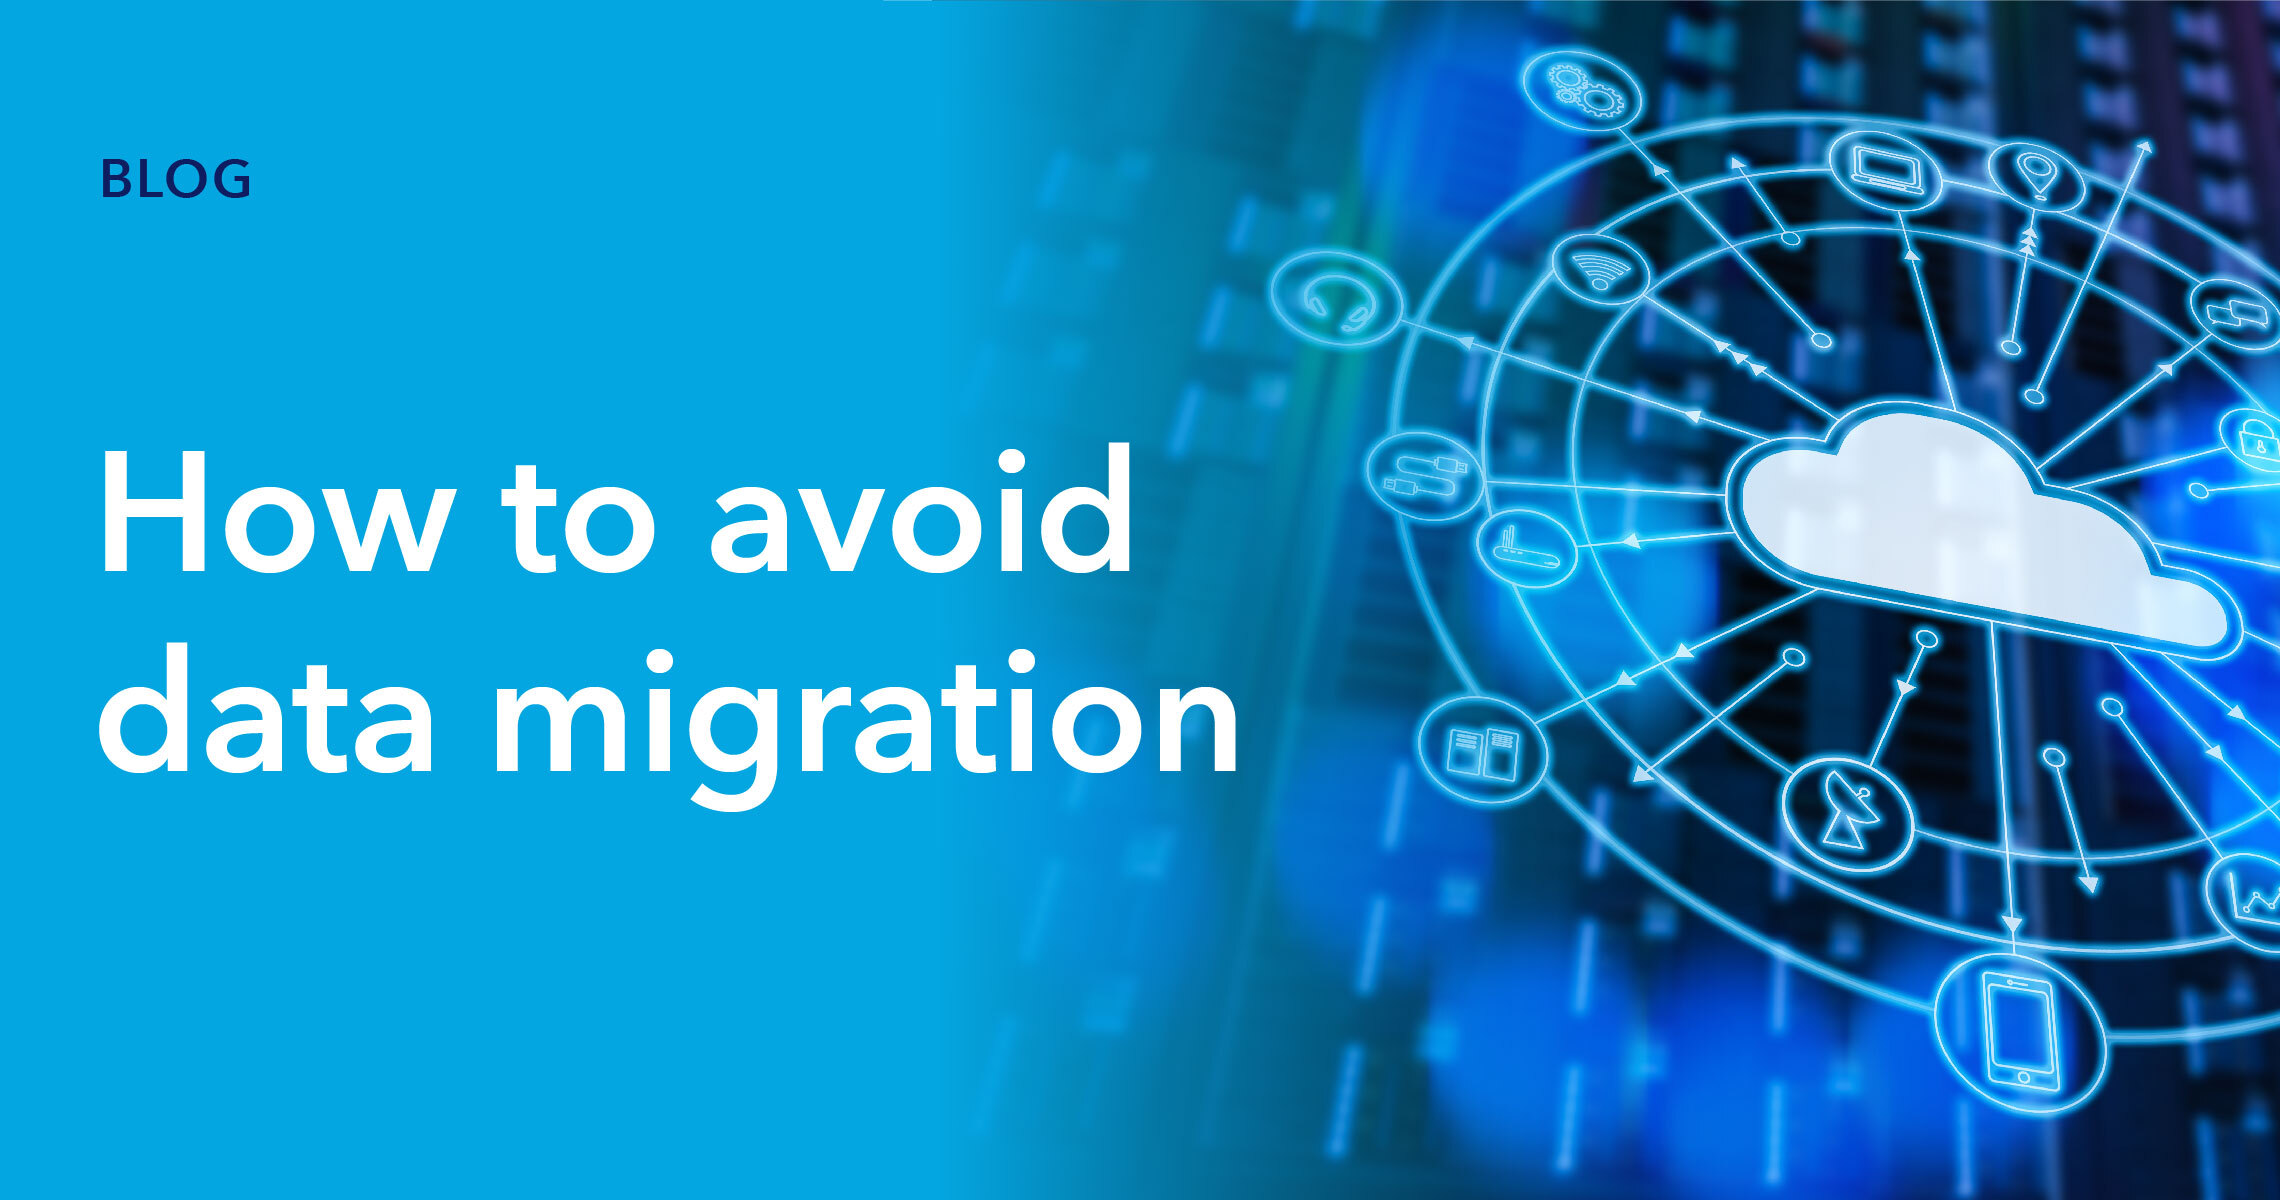 How to avoid data migration